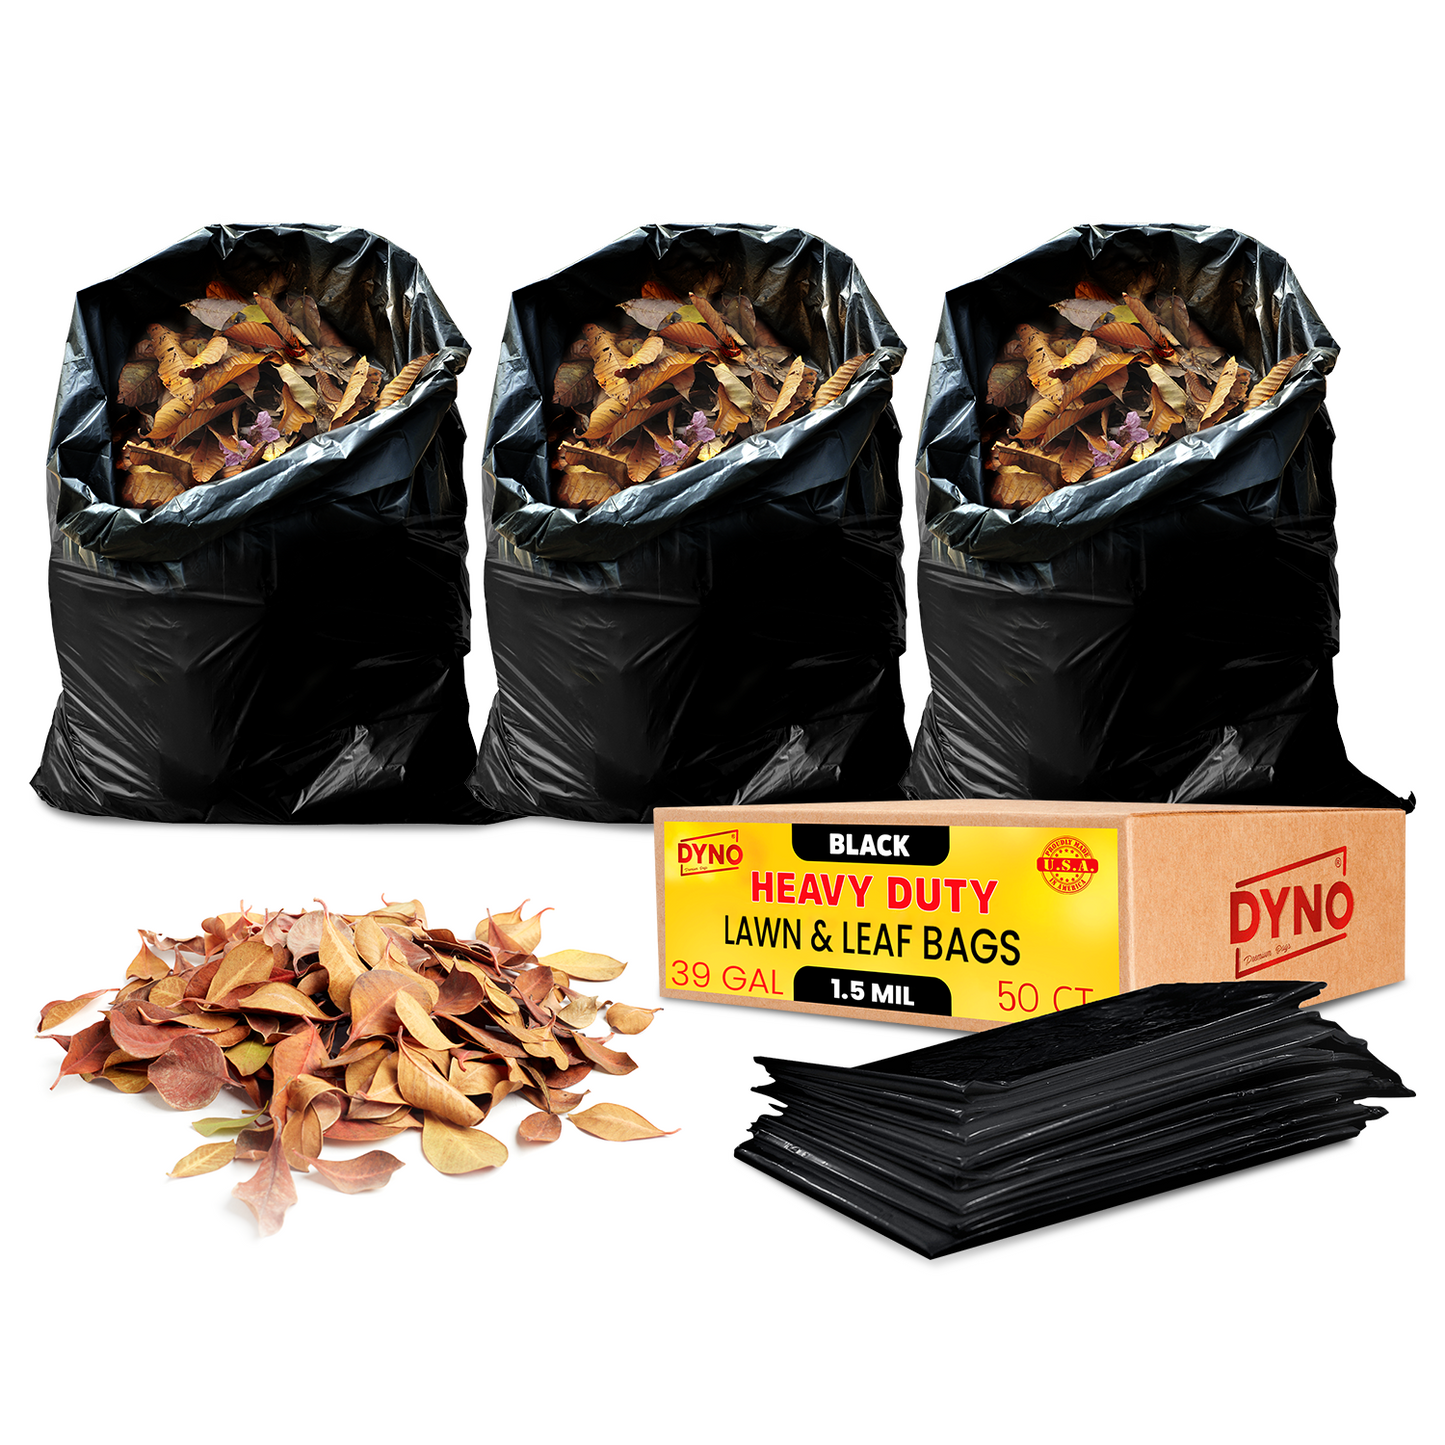 Dyno Products Online 39-Gallon, 1.5 Mil Thick Heavy-Duty Black Trash Bags - 50 Count Extra Large Plastic Garbage Liners Fit Huge Cans for Home Garden Lawn Yard Recycling Construction & Commercial Use